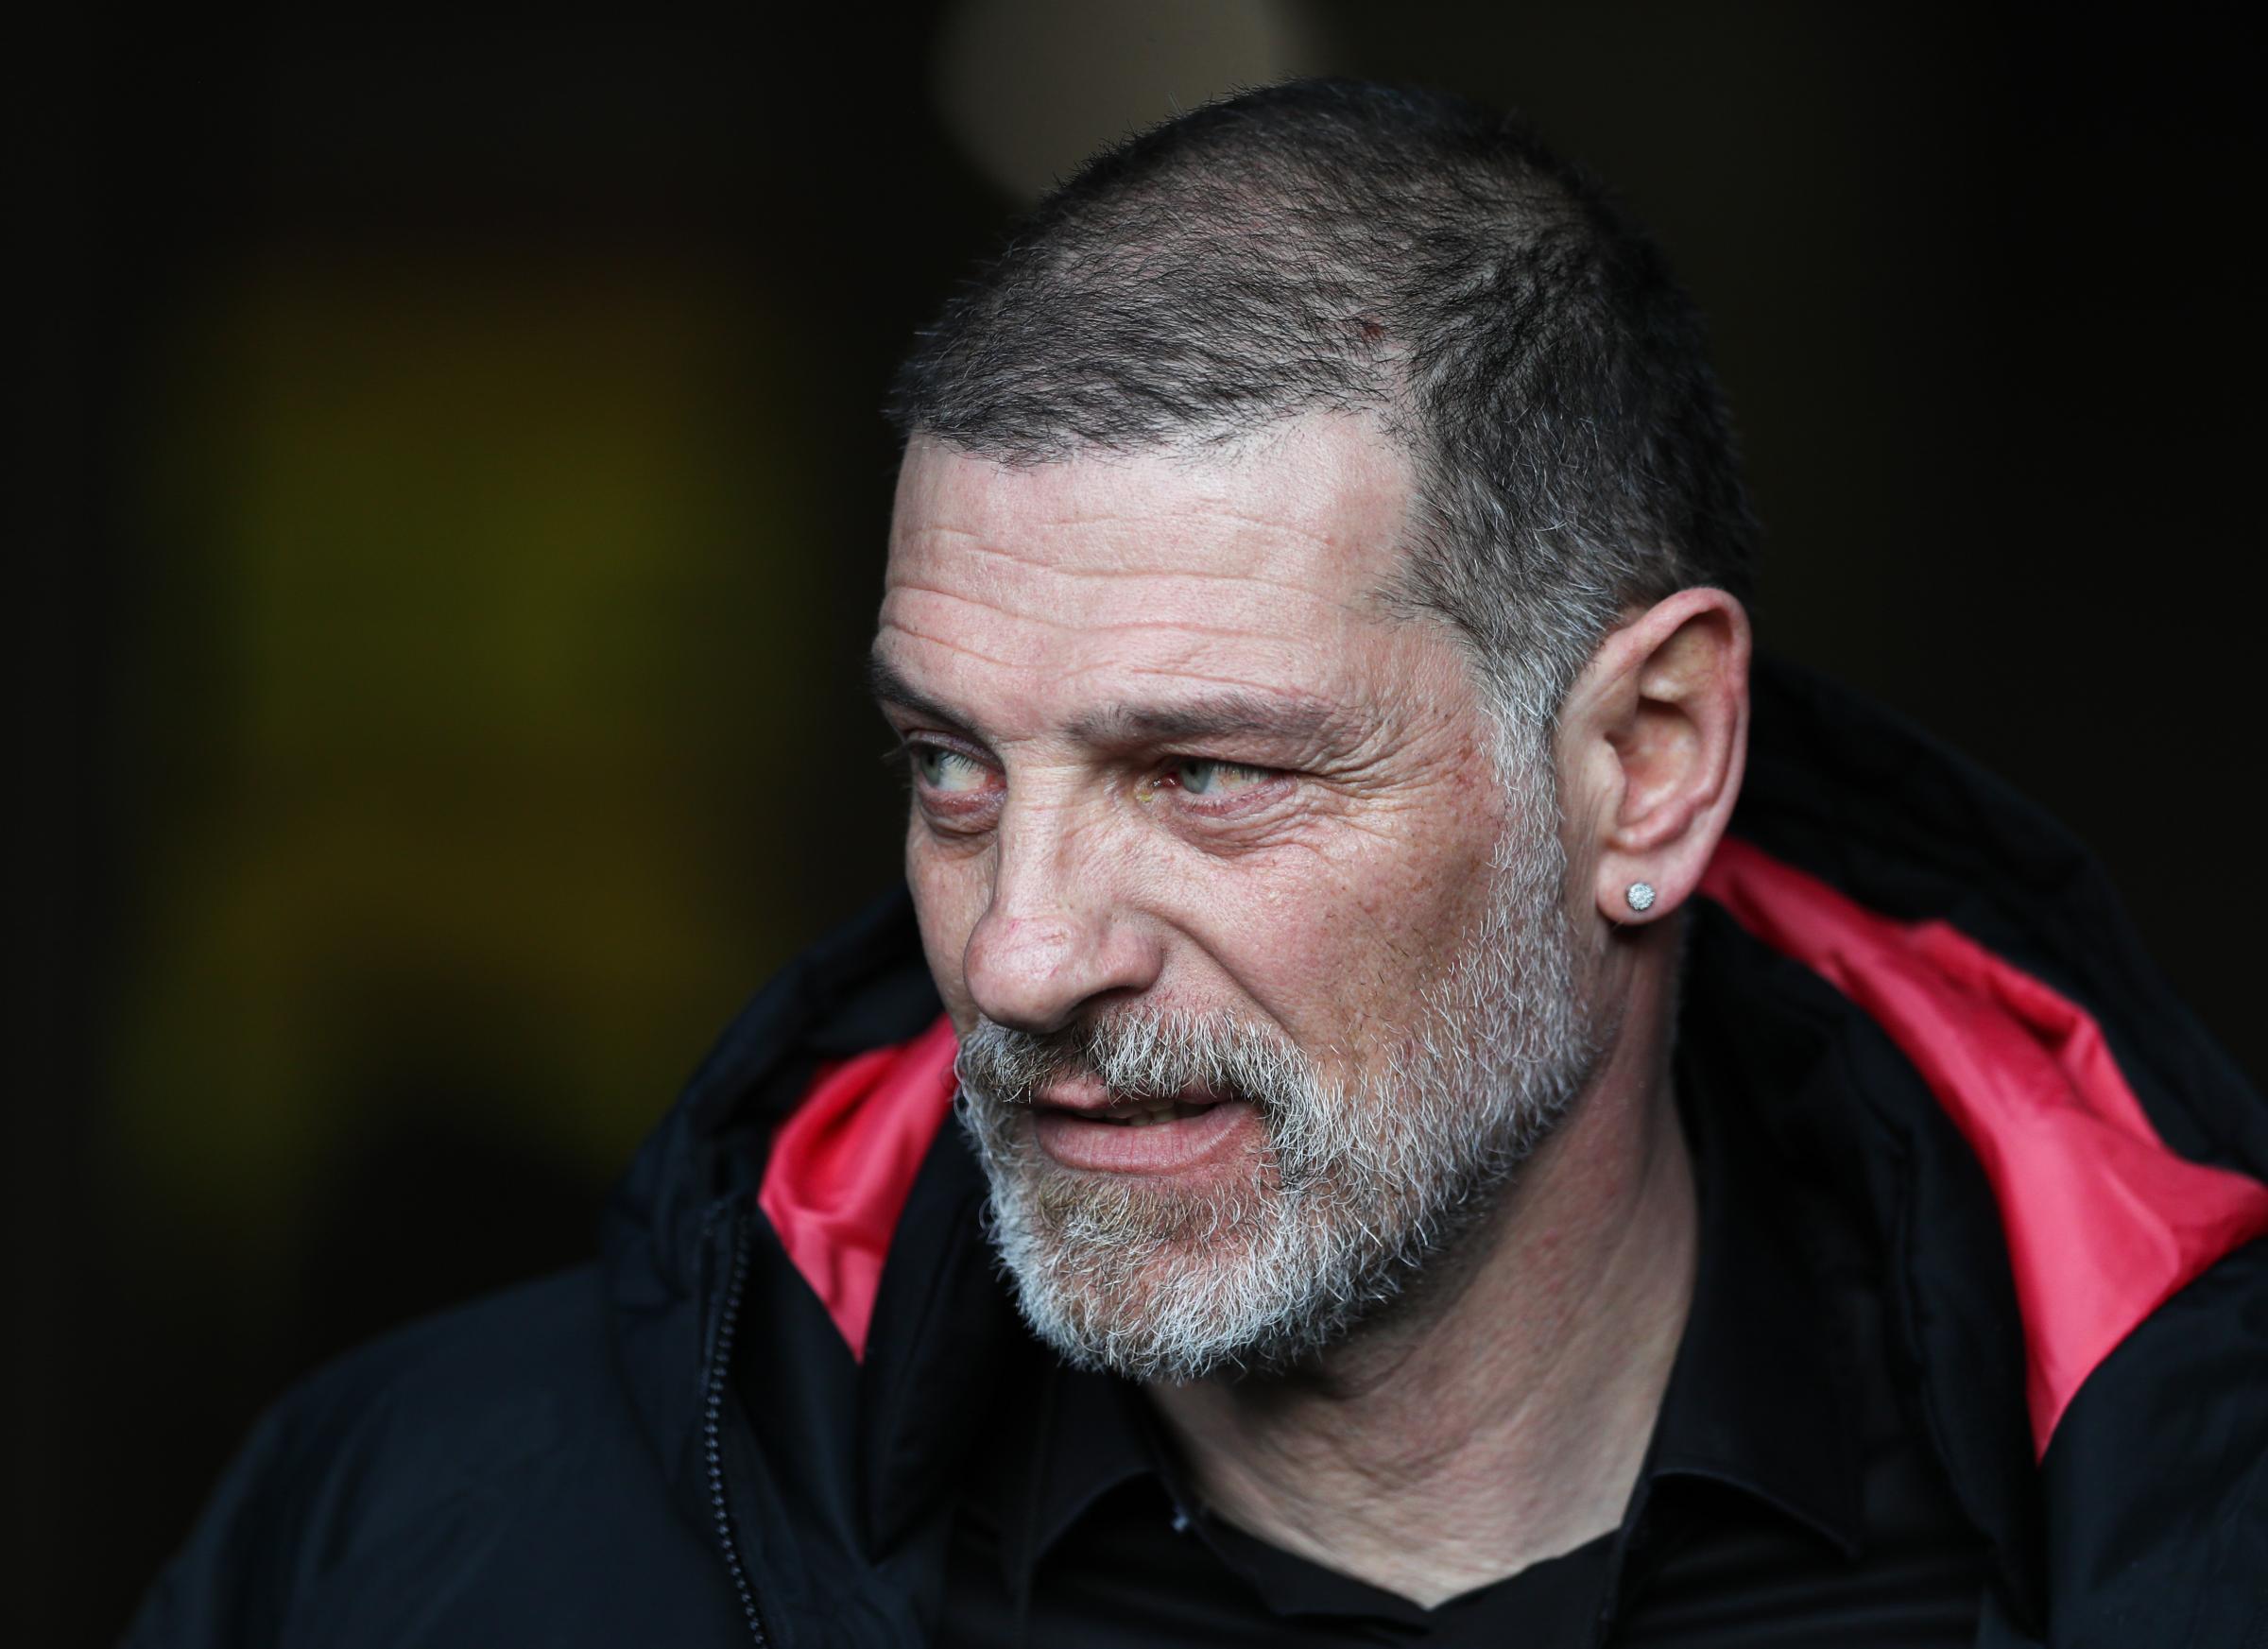 Bilic cites that missing quality as reason Watford were held